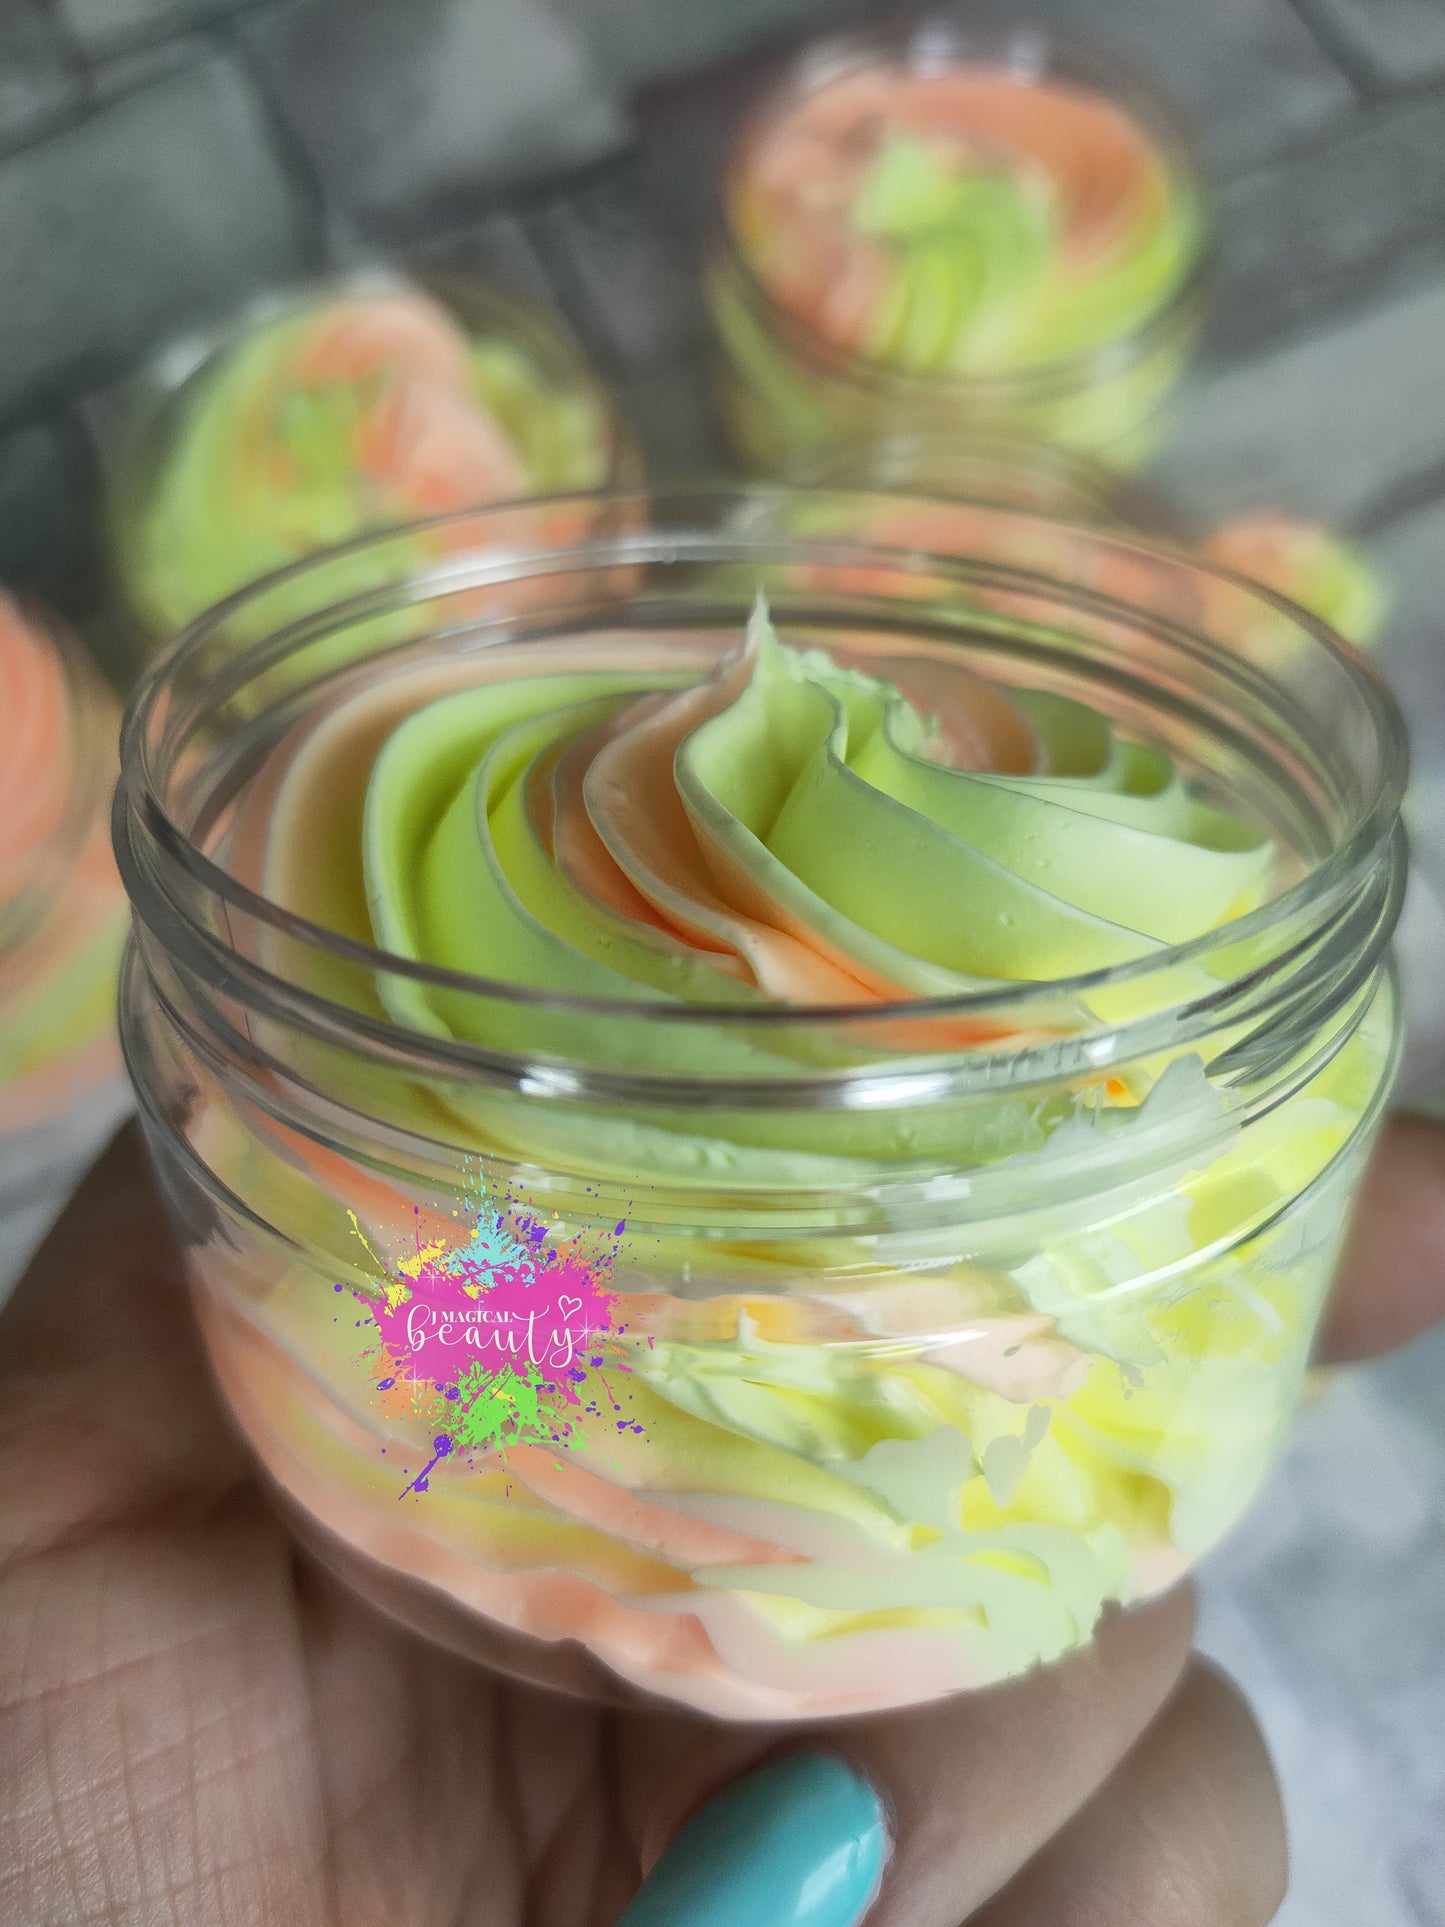 Whipped Body Butter Peaches & Cream scent